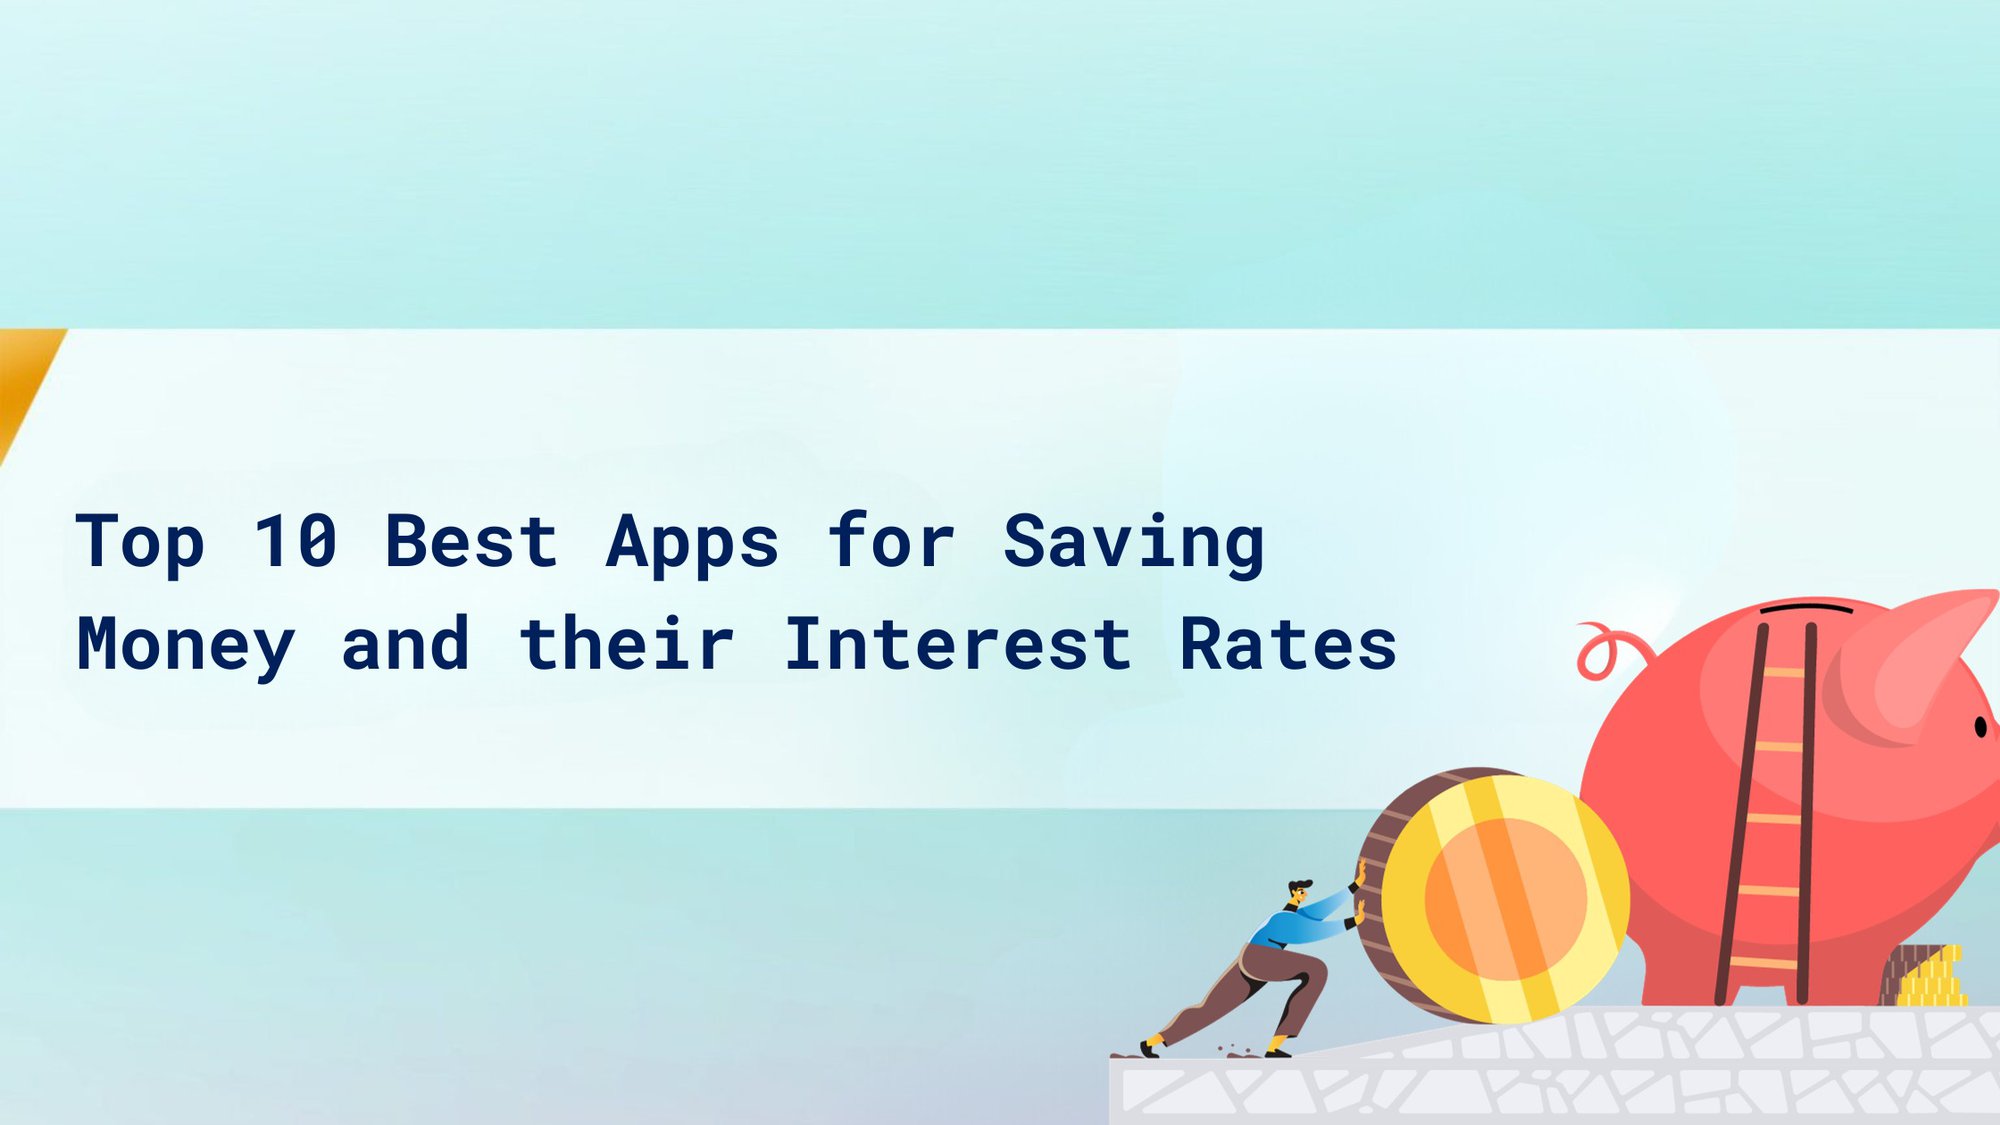 Top 10 Best Apps for Saving Money and Their Interest Rates